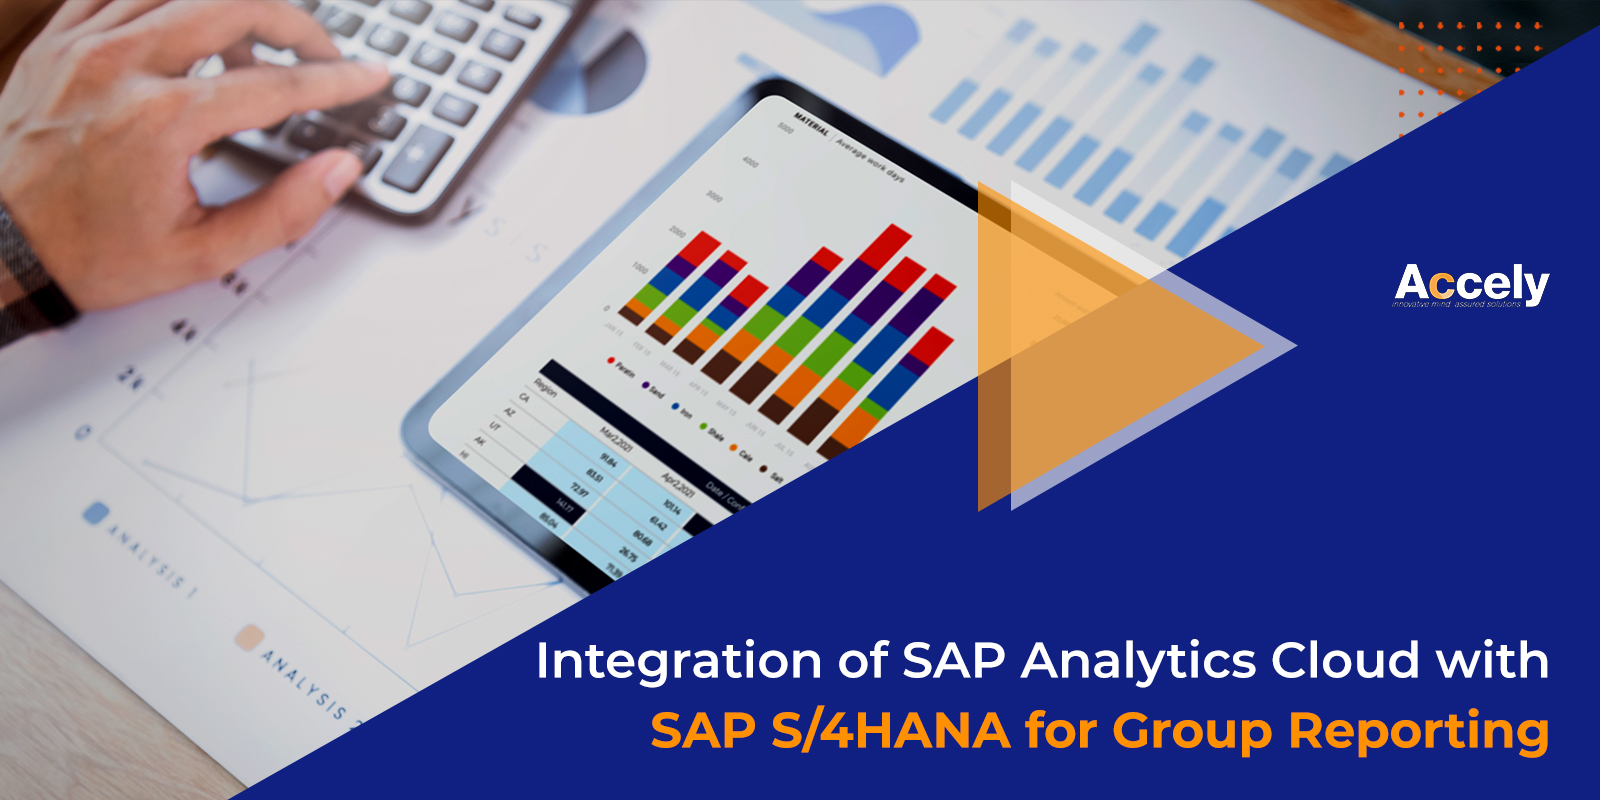 Integration of SAP Analytics Cloud with SAP S/4HANA for Group Reporting